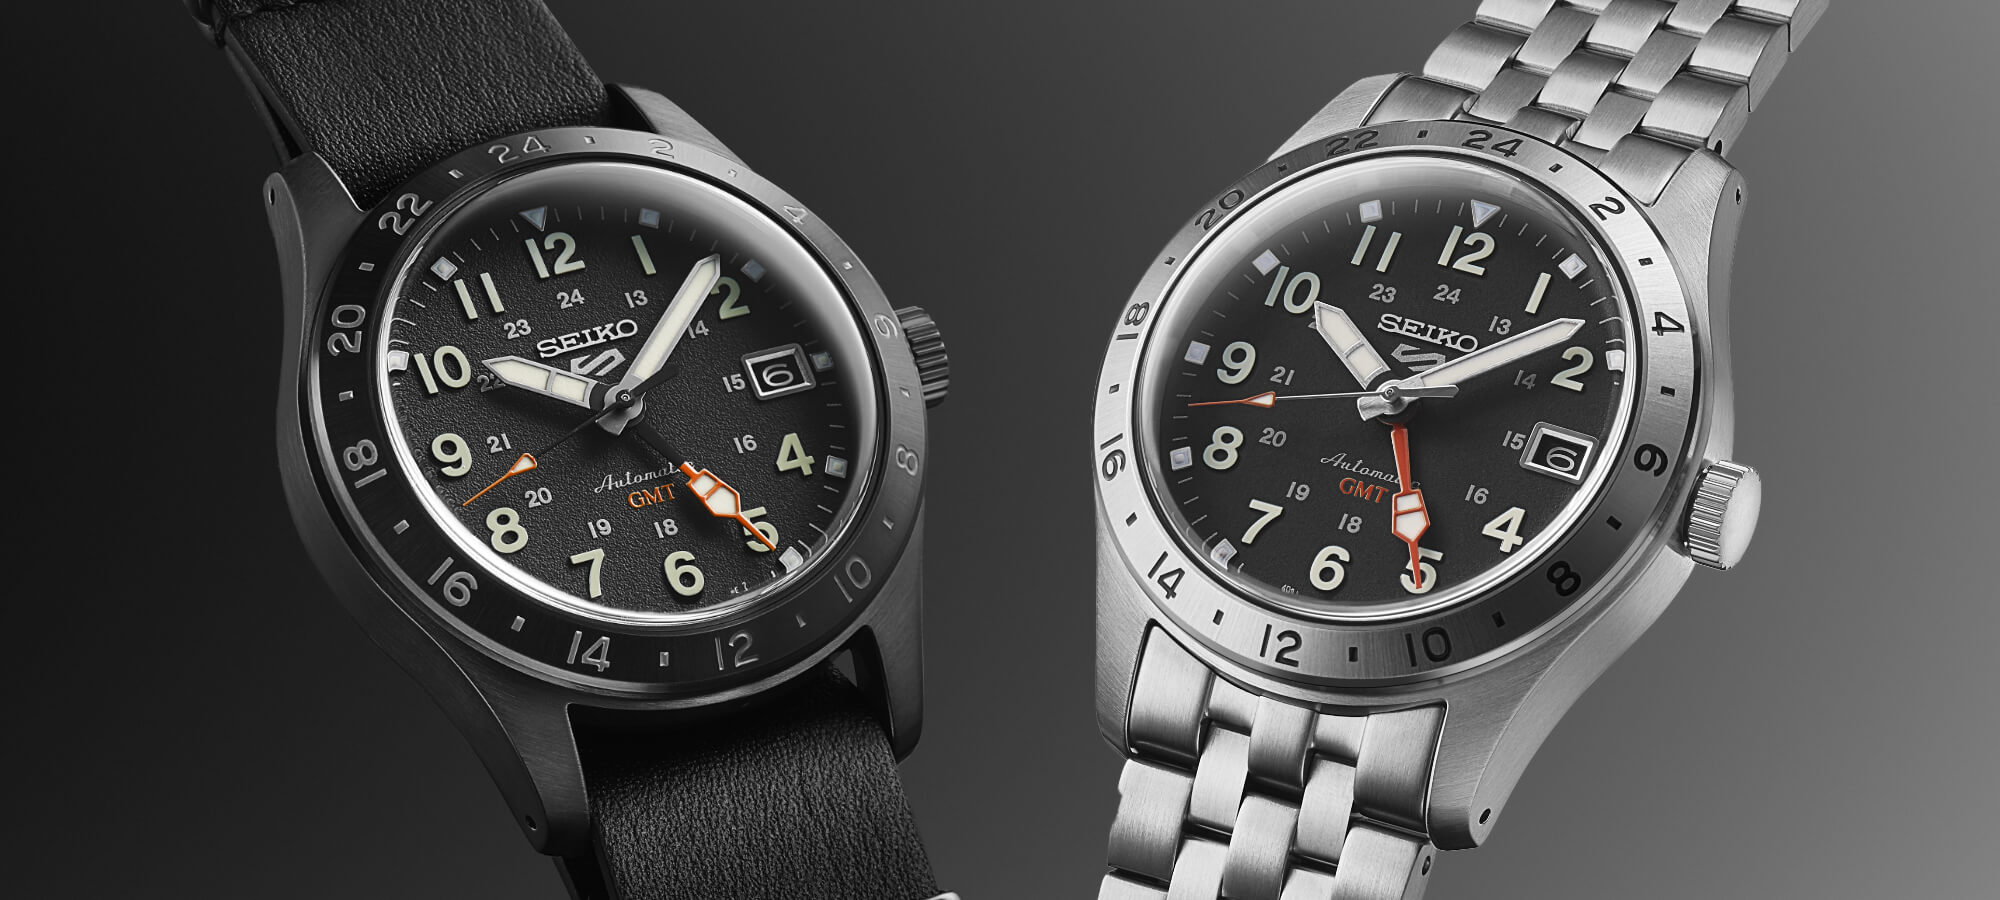 New Release: Seiko 5 Sports Field GMT SSK023 And SSK025 Watches